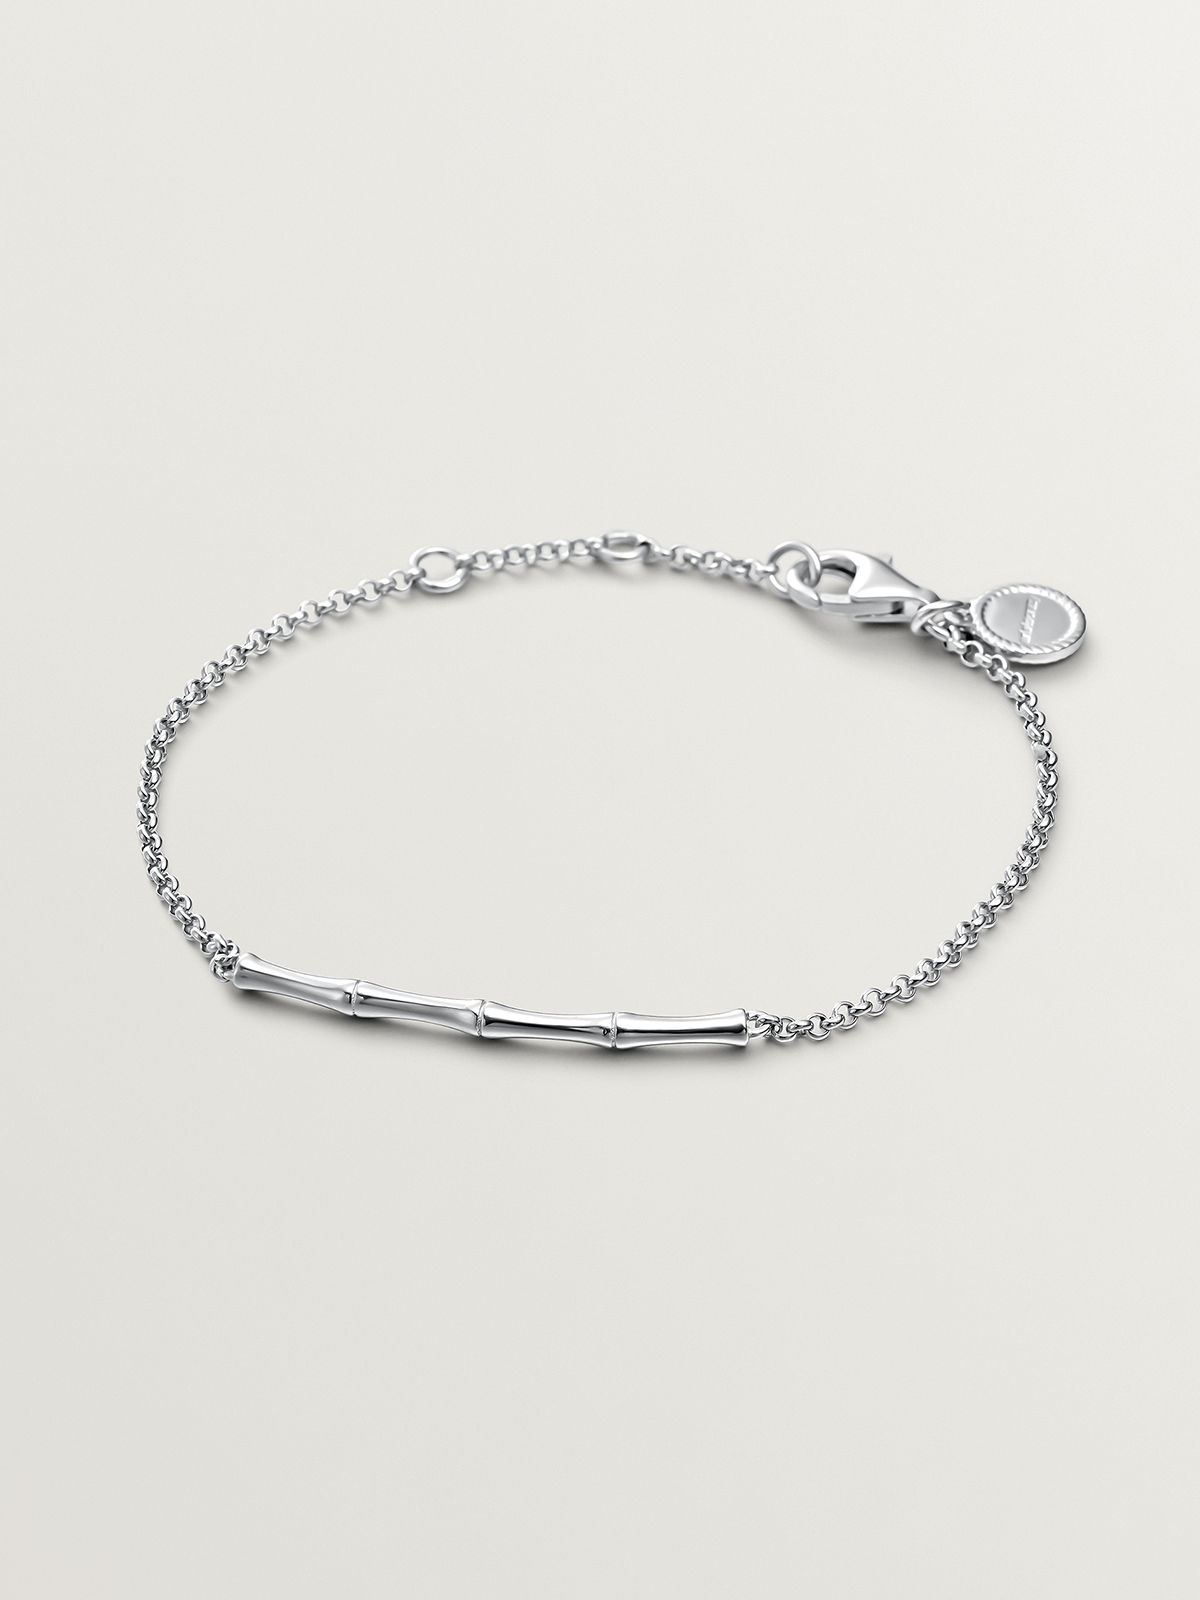 925 Silver bracelet with bamboo cane